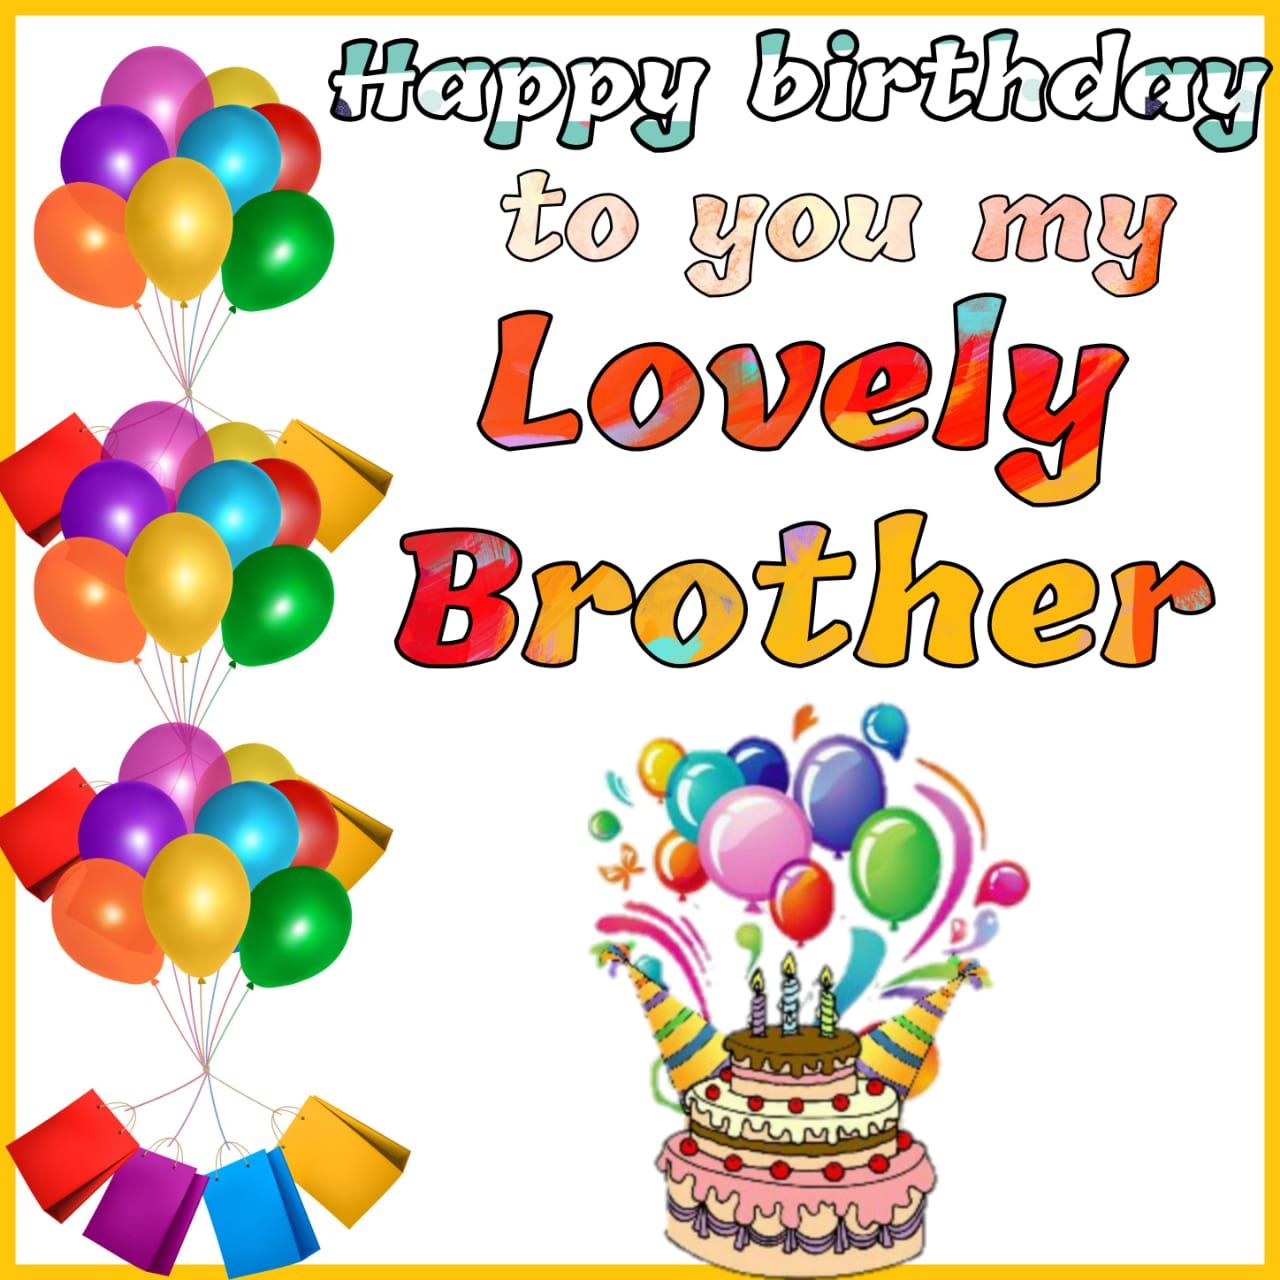 Happy Birthday Brother image with cake and balloon free download wishes image